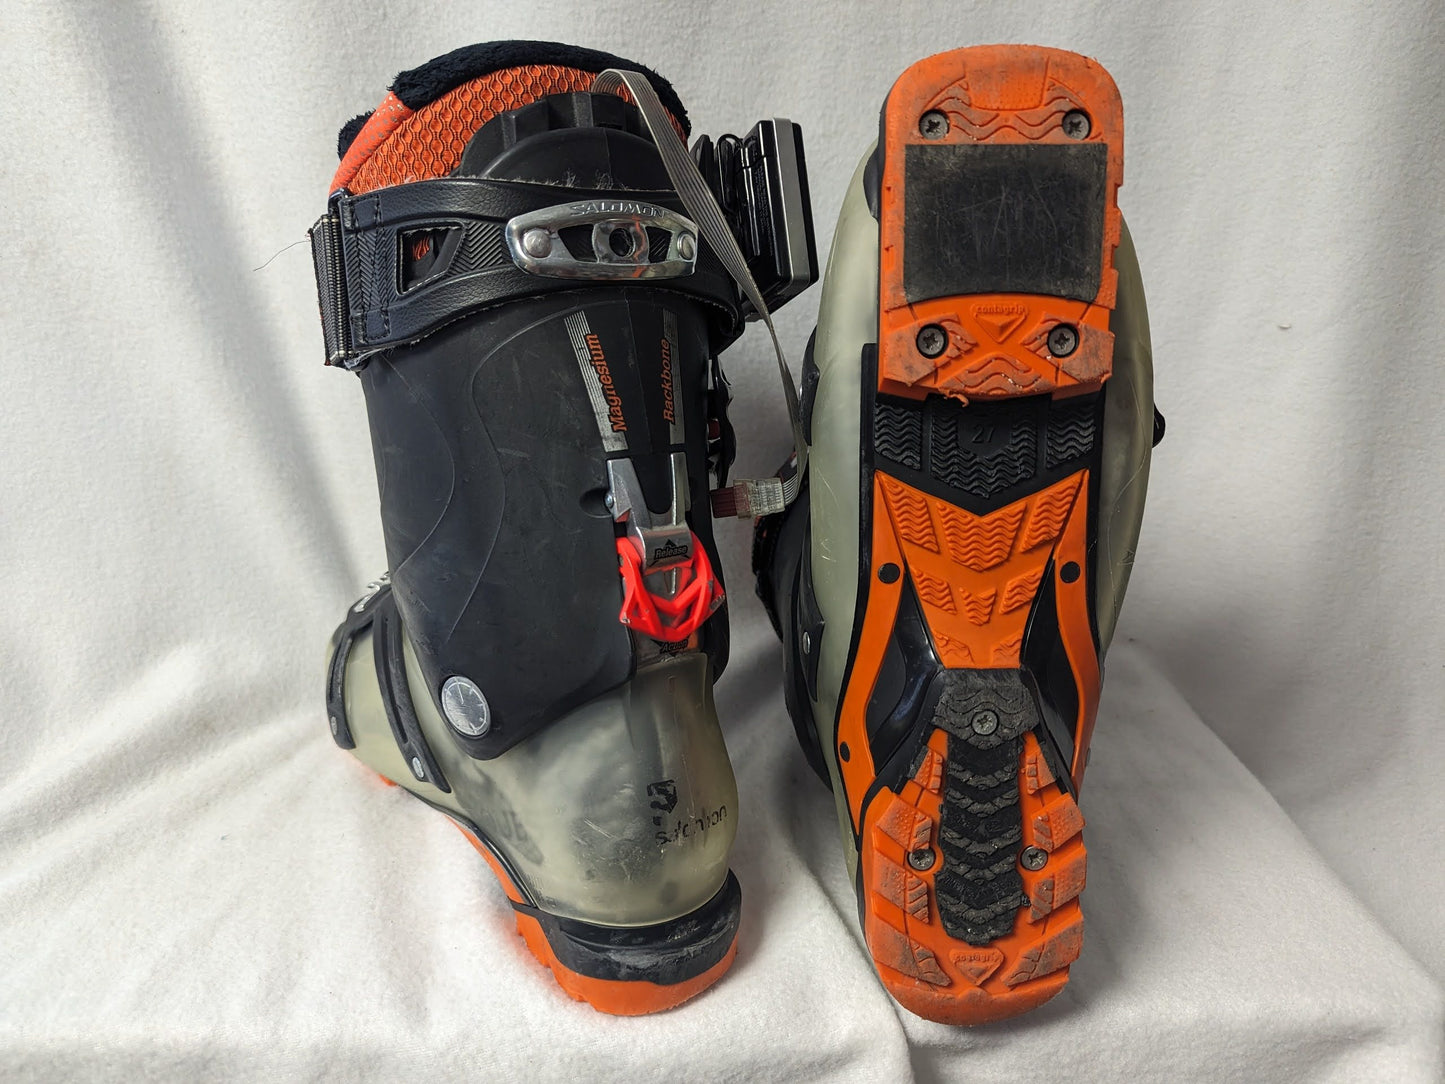 Salomon Quest 90 Energyzer Ski Boots *Heating Units Not Tested* Size 27.5 Color Green Condition Used